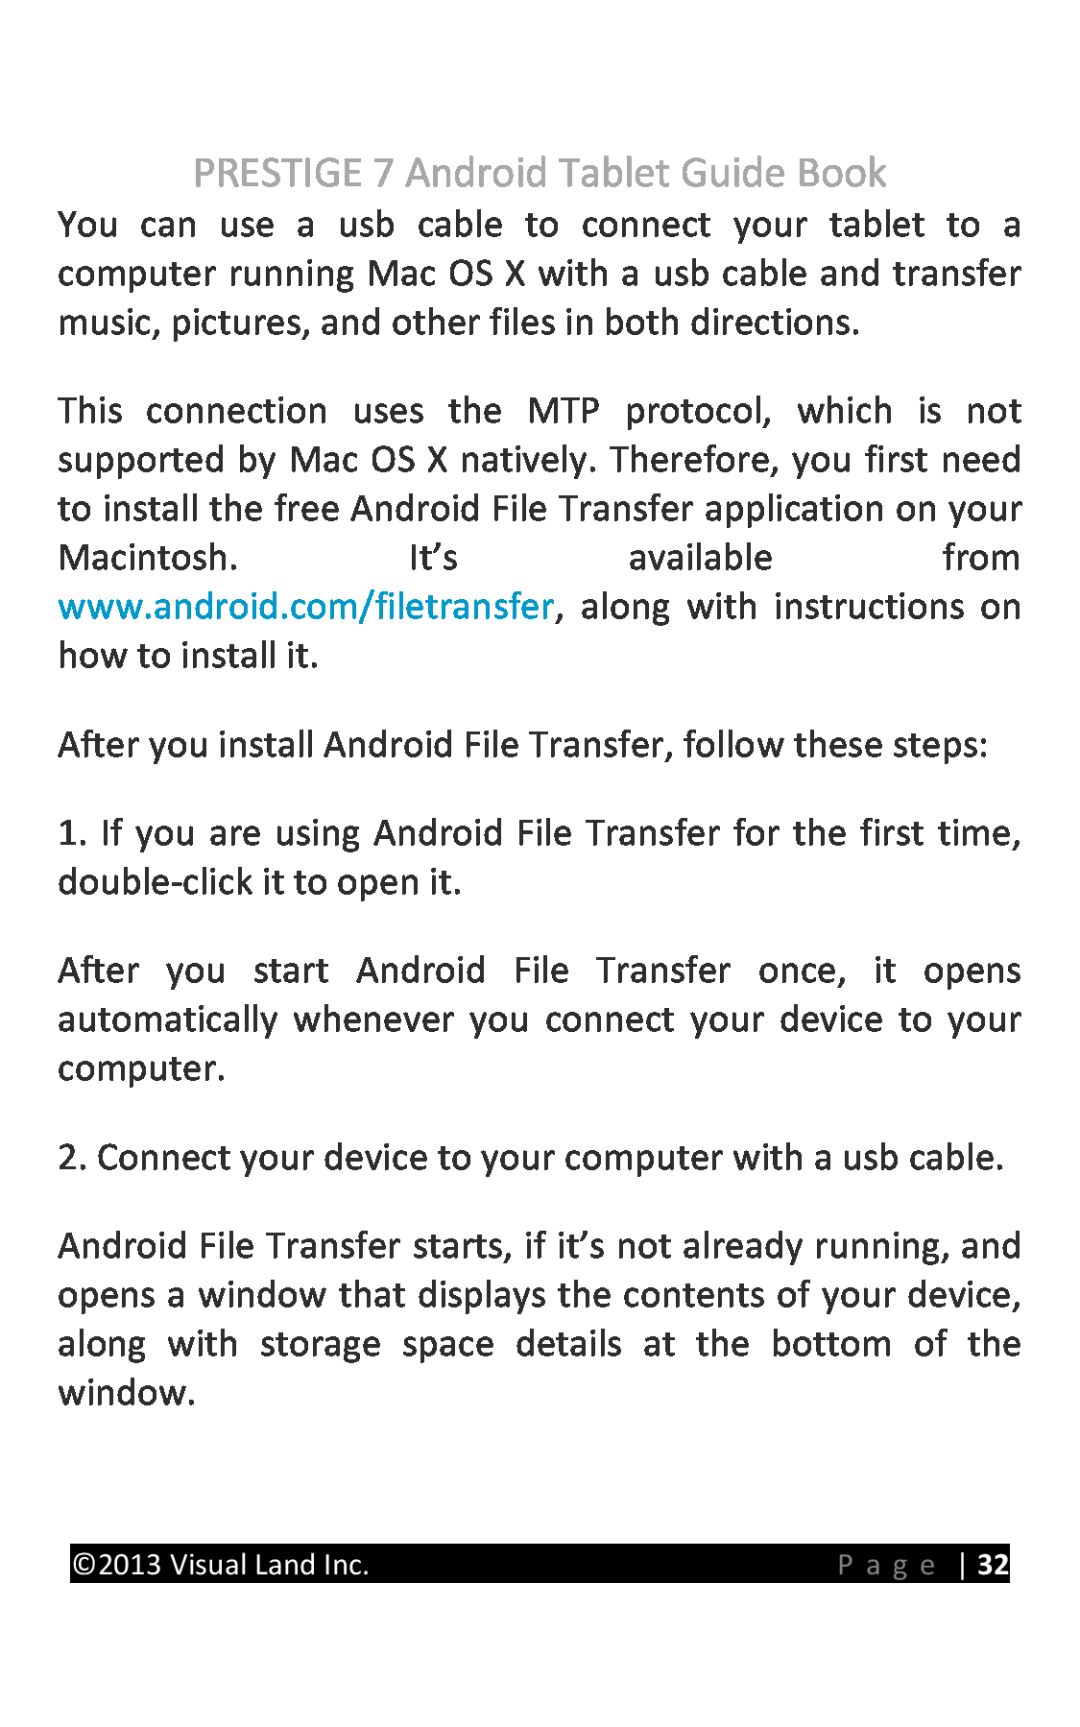 Visual Land 7D8TCBLK PRESTIGE 7 Android Tablet Guide Book, After you install Android File Transfer, follow these steps 